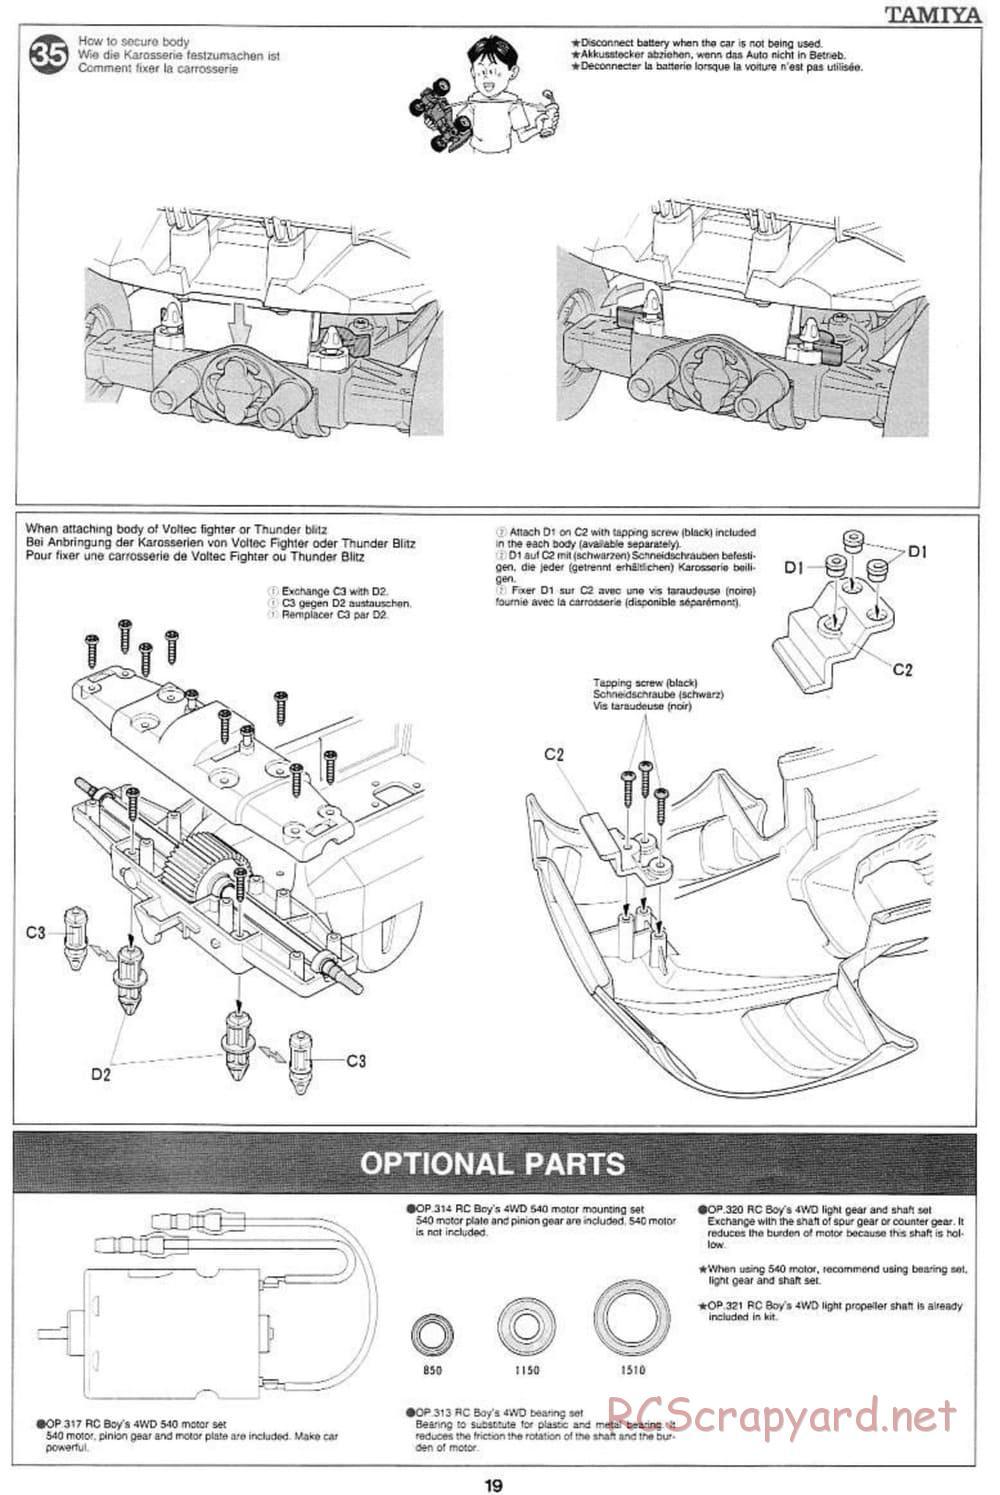 Tamiya - Wild Ceptor - Boy's 4WD Chassis - Manual - Page 19